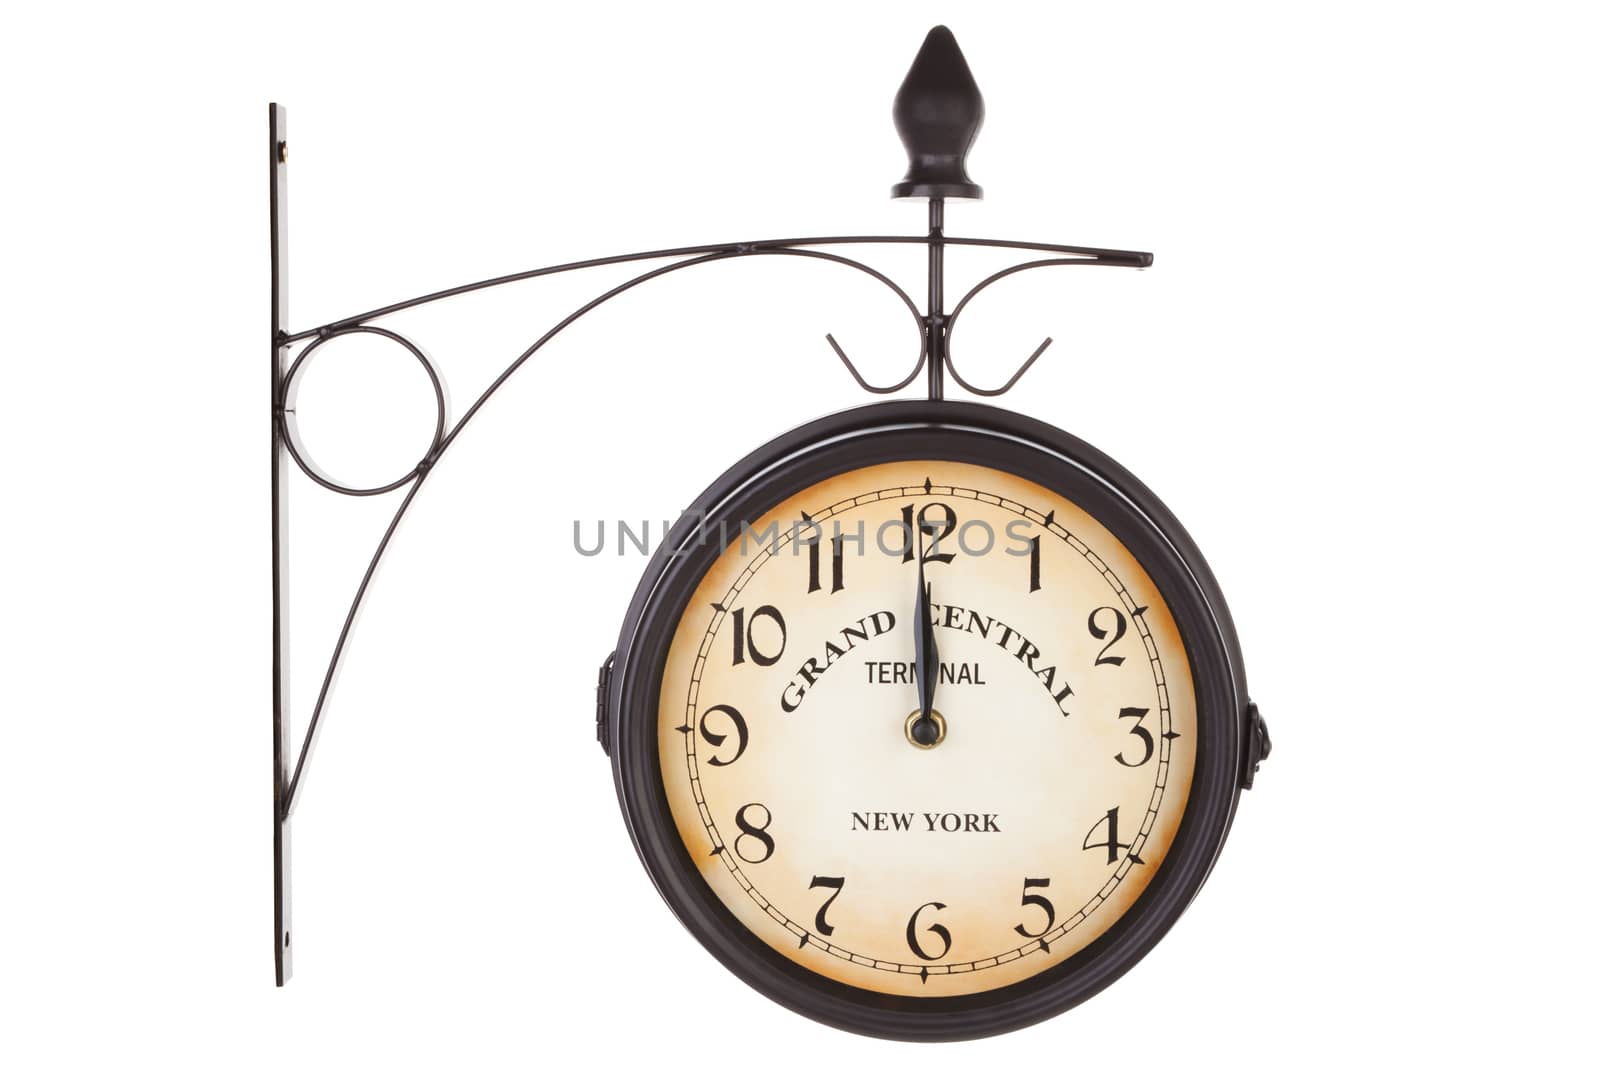 Classic station clock isoalted on white. by eskymaks